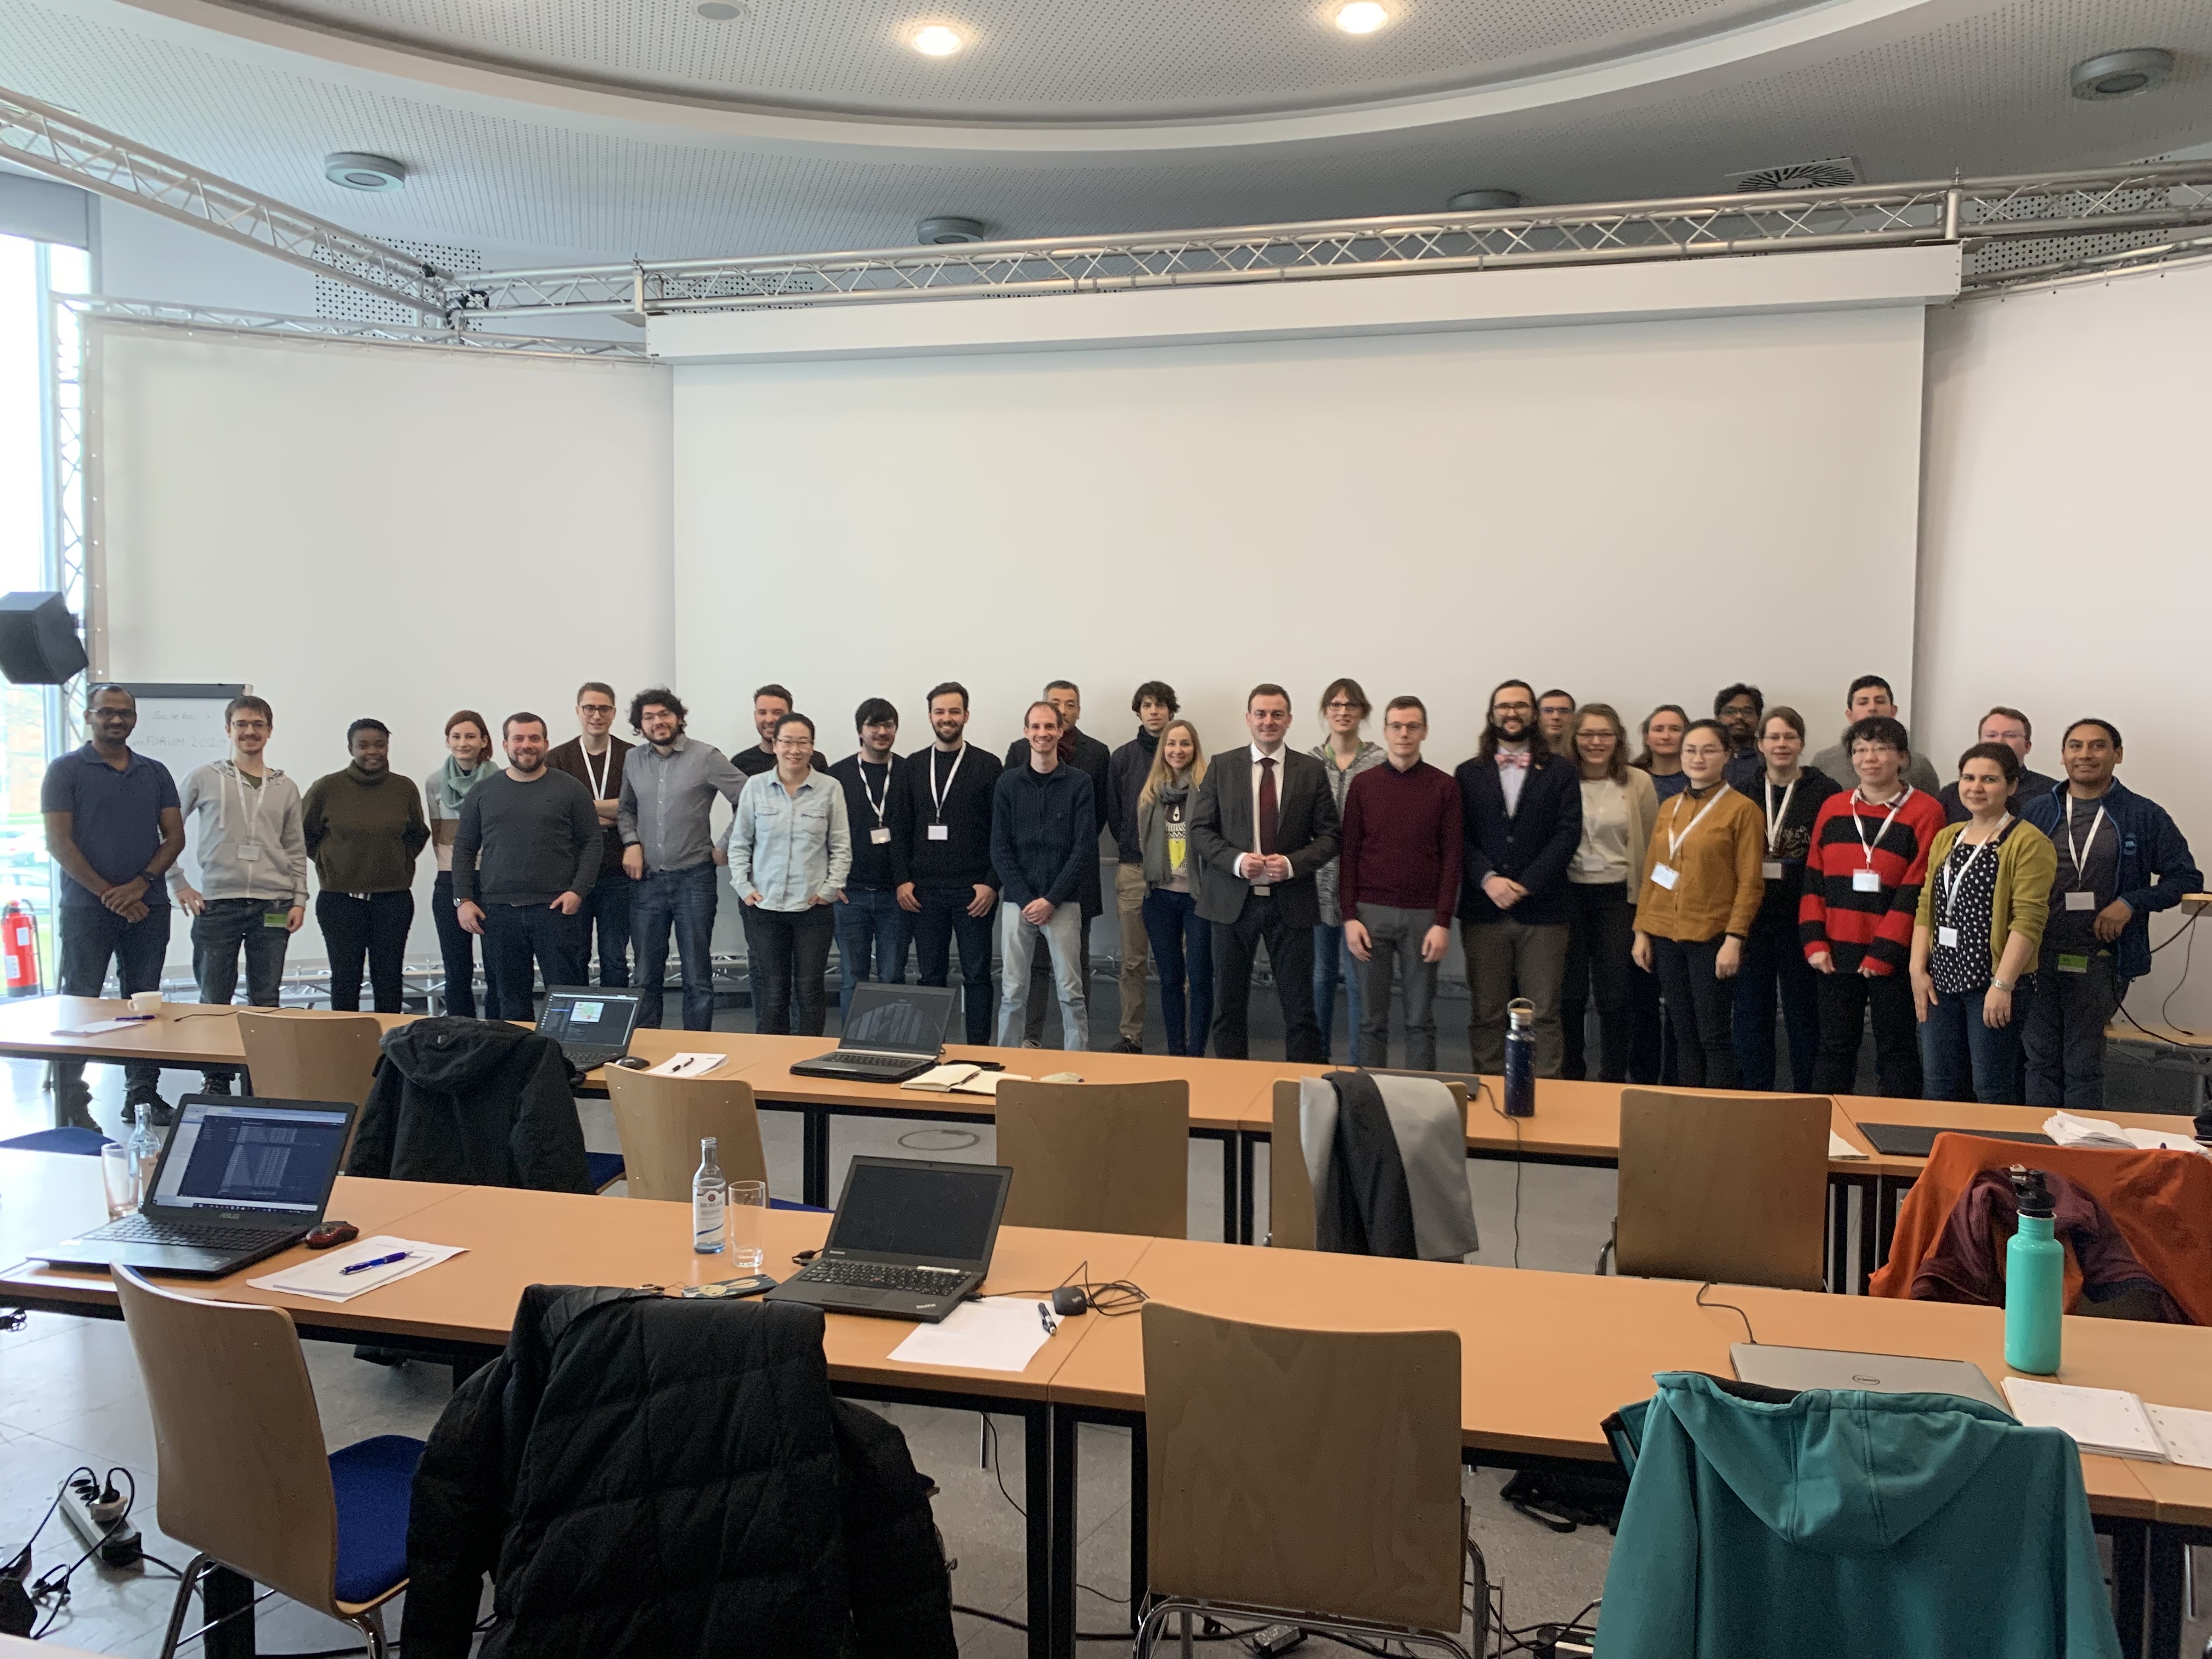 PRACE Tutorial Parallel and Scalable Machine Learning Course Group Photo